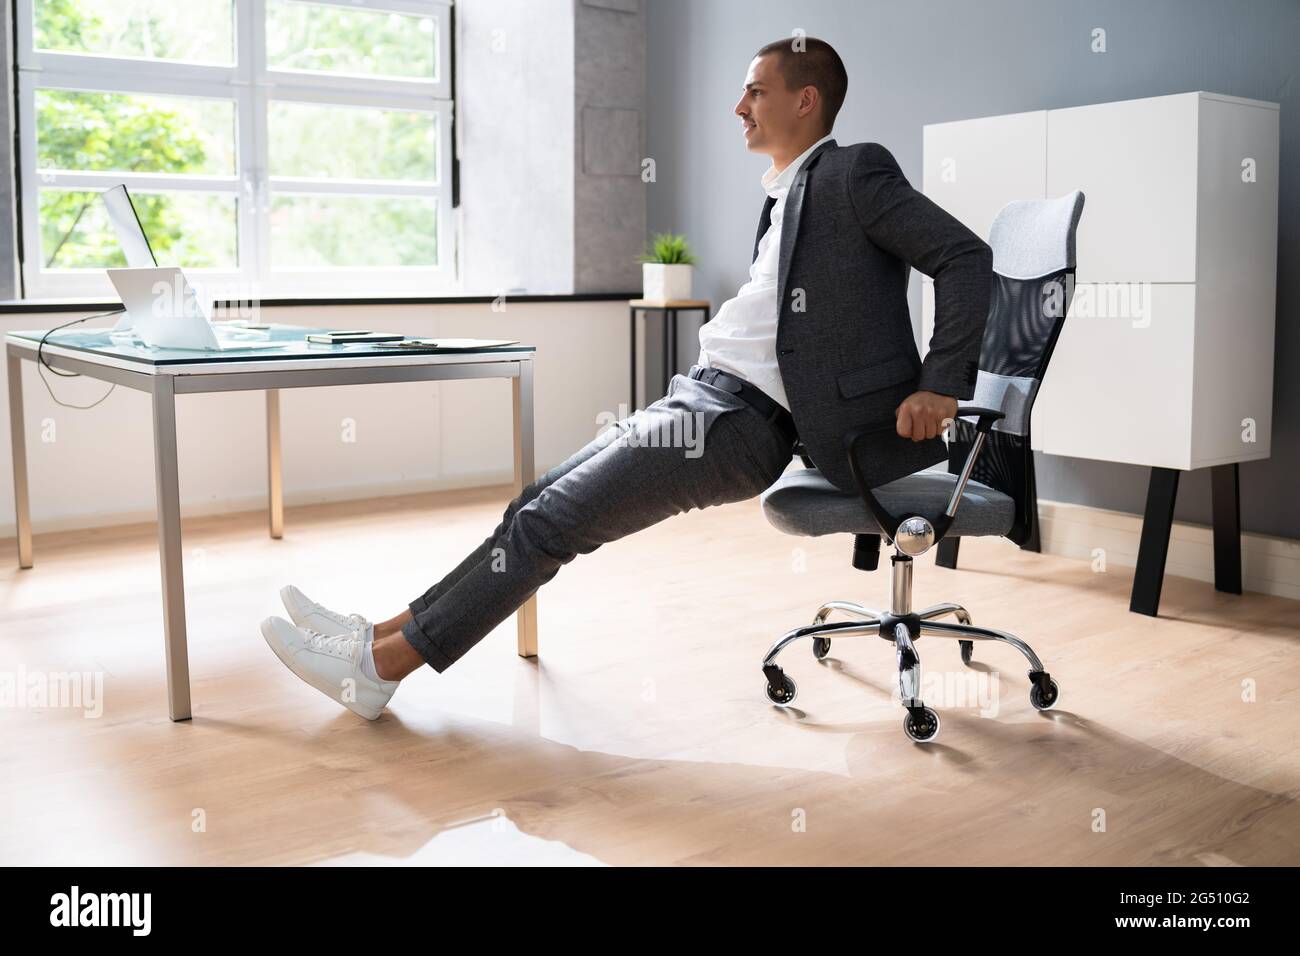 Chair Triceps Dip In Office. Workout Exercise At Desk Stock Photo - Alamy